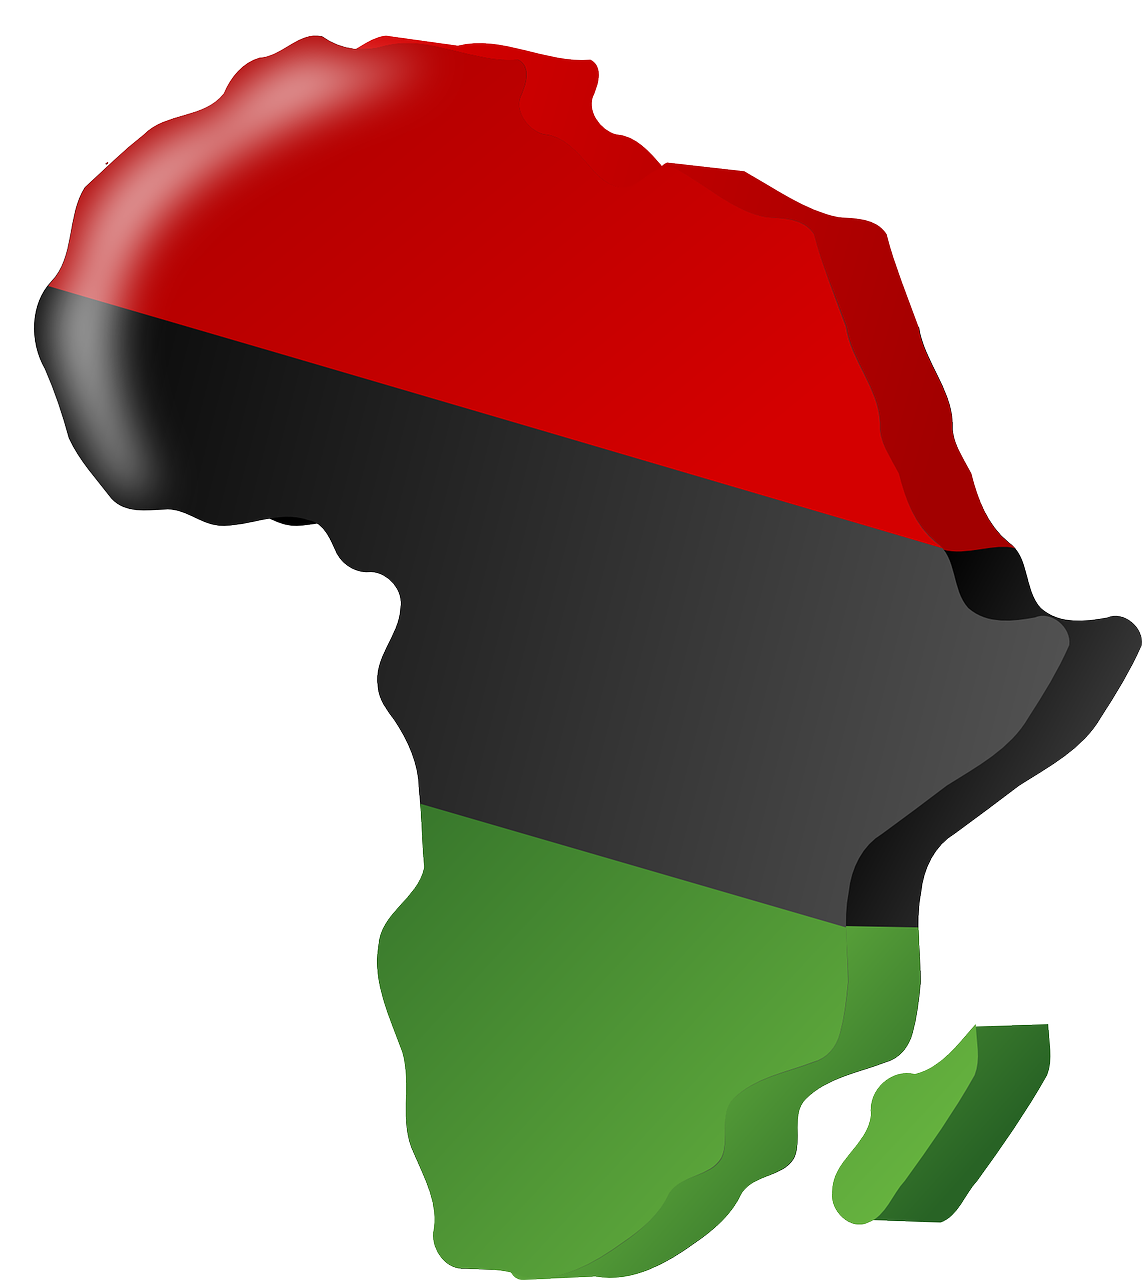 pan-african flag africa continent free photo